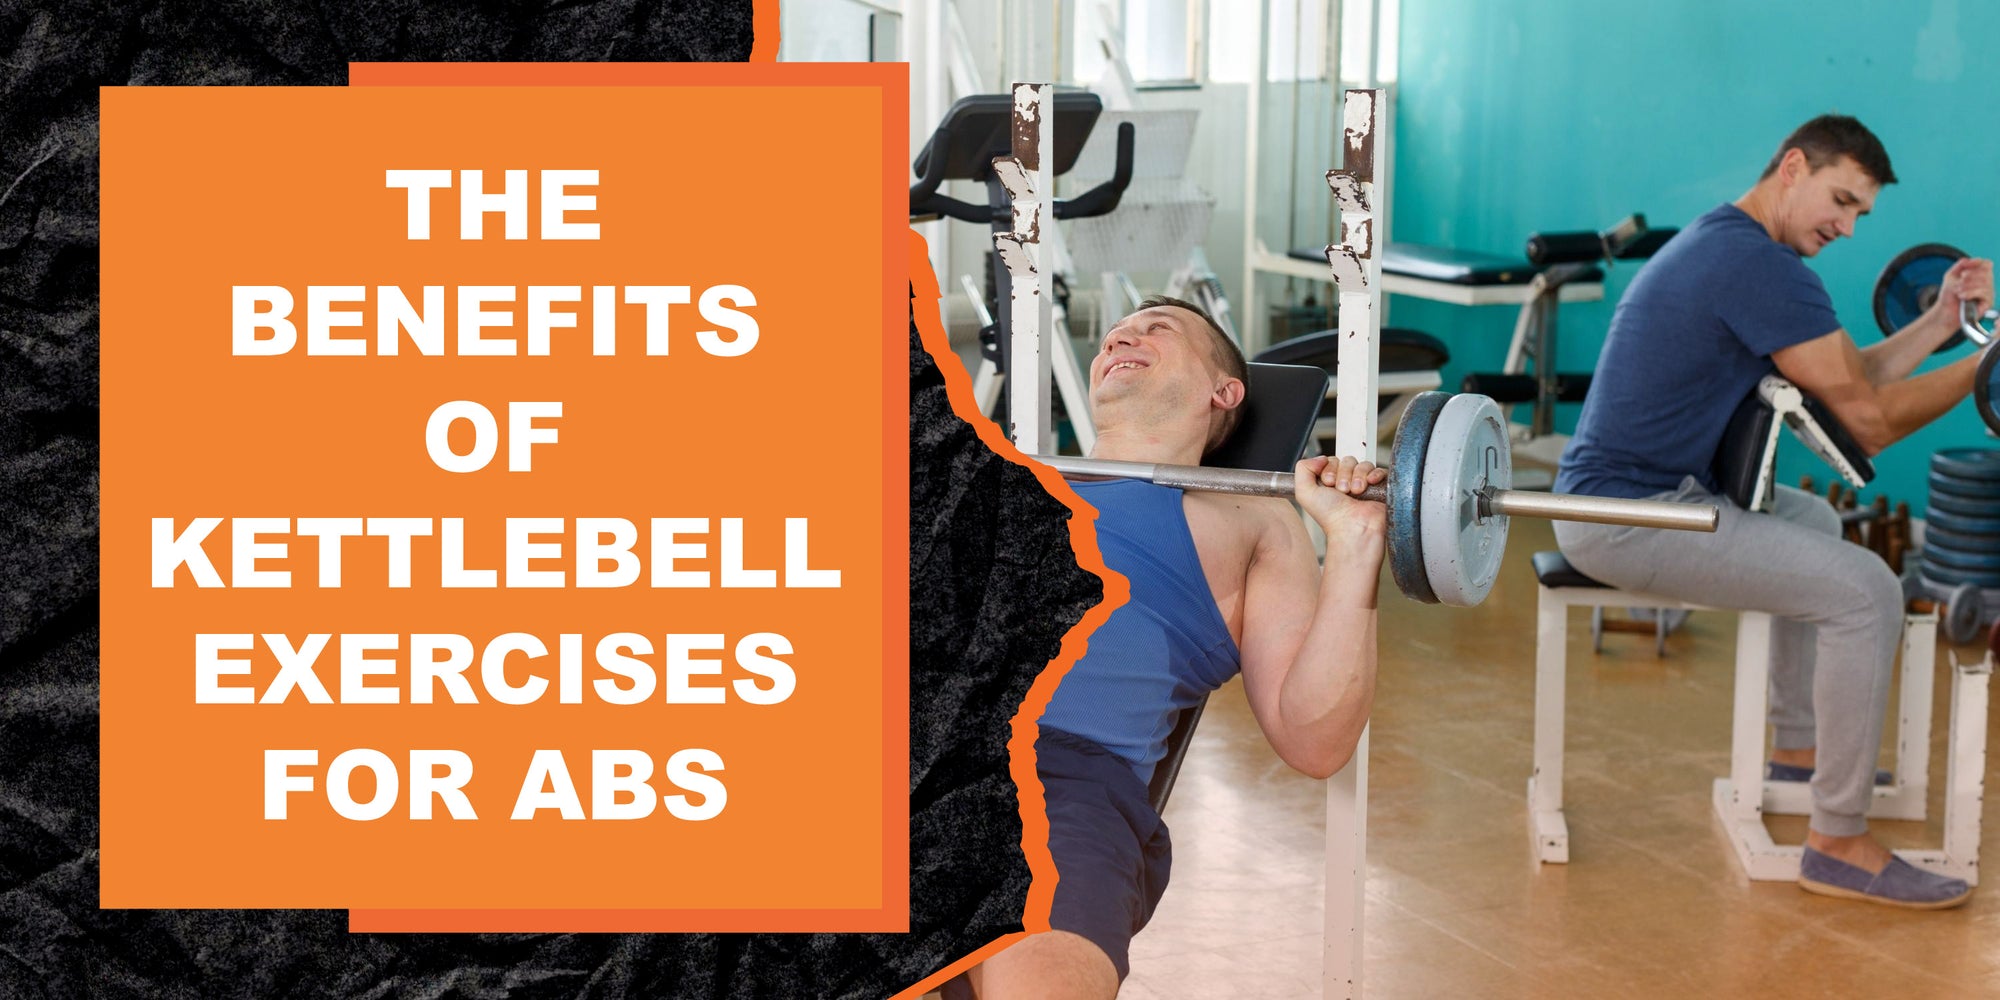 The Benefits of Kettlebell Exercises for Abs